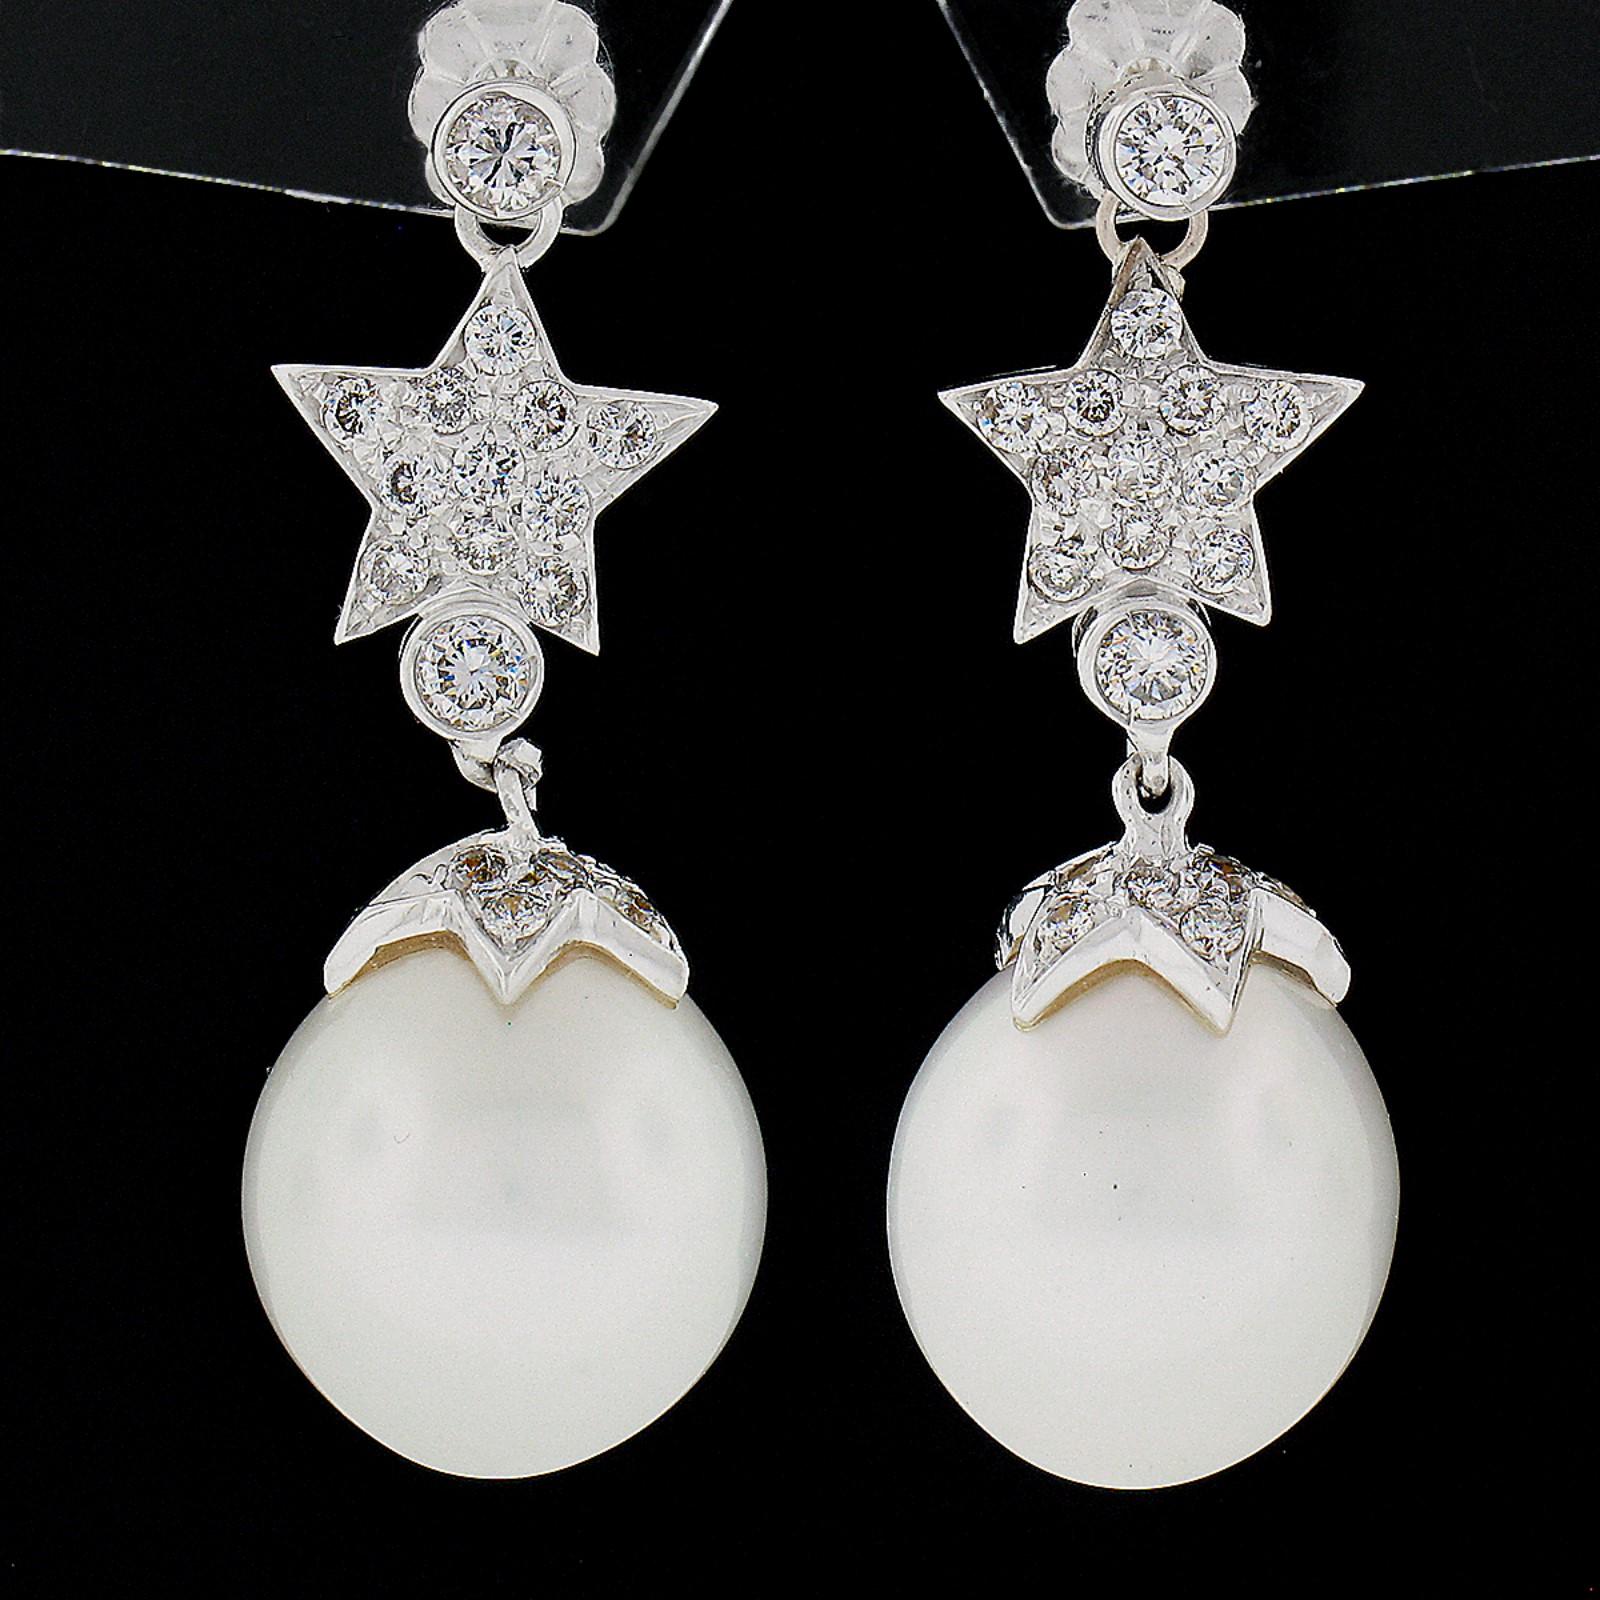 This fancy pair of diamond and pearl dangle earrings is very well crafted in solid 18k white gold. They feature a truly elegant star design that is completely covered with round brilliant cut diamonds and an ovalish-shape white pearl that together